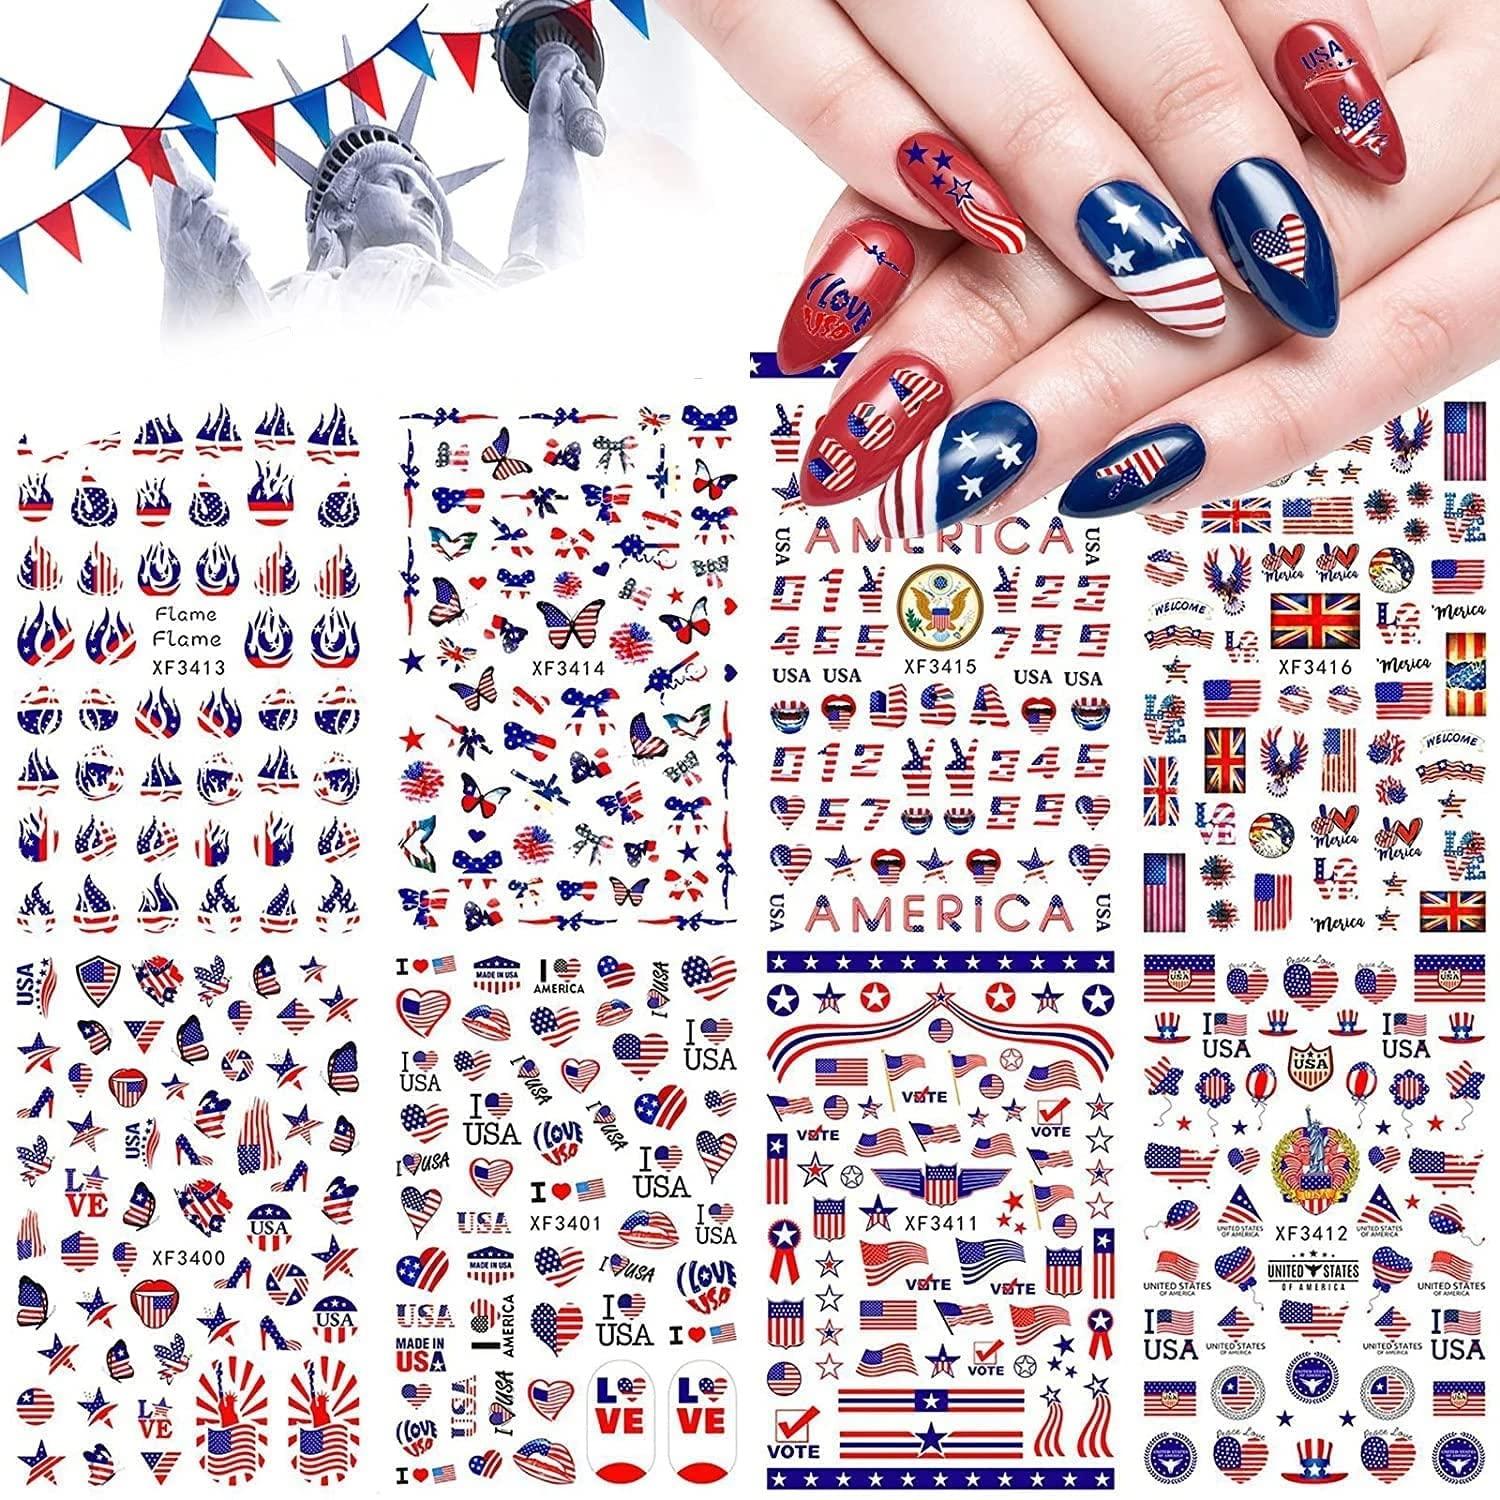 American Nails | American Nails By An | Amsterdam